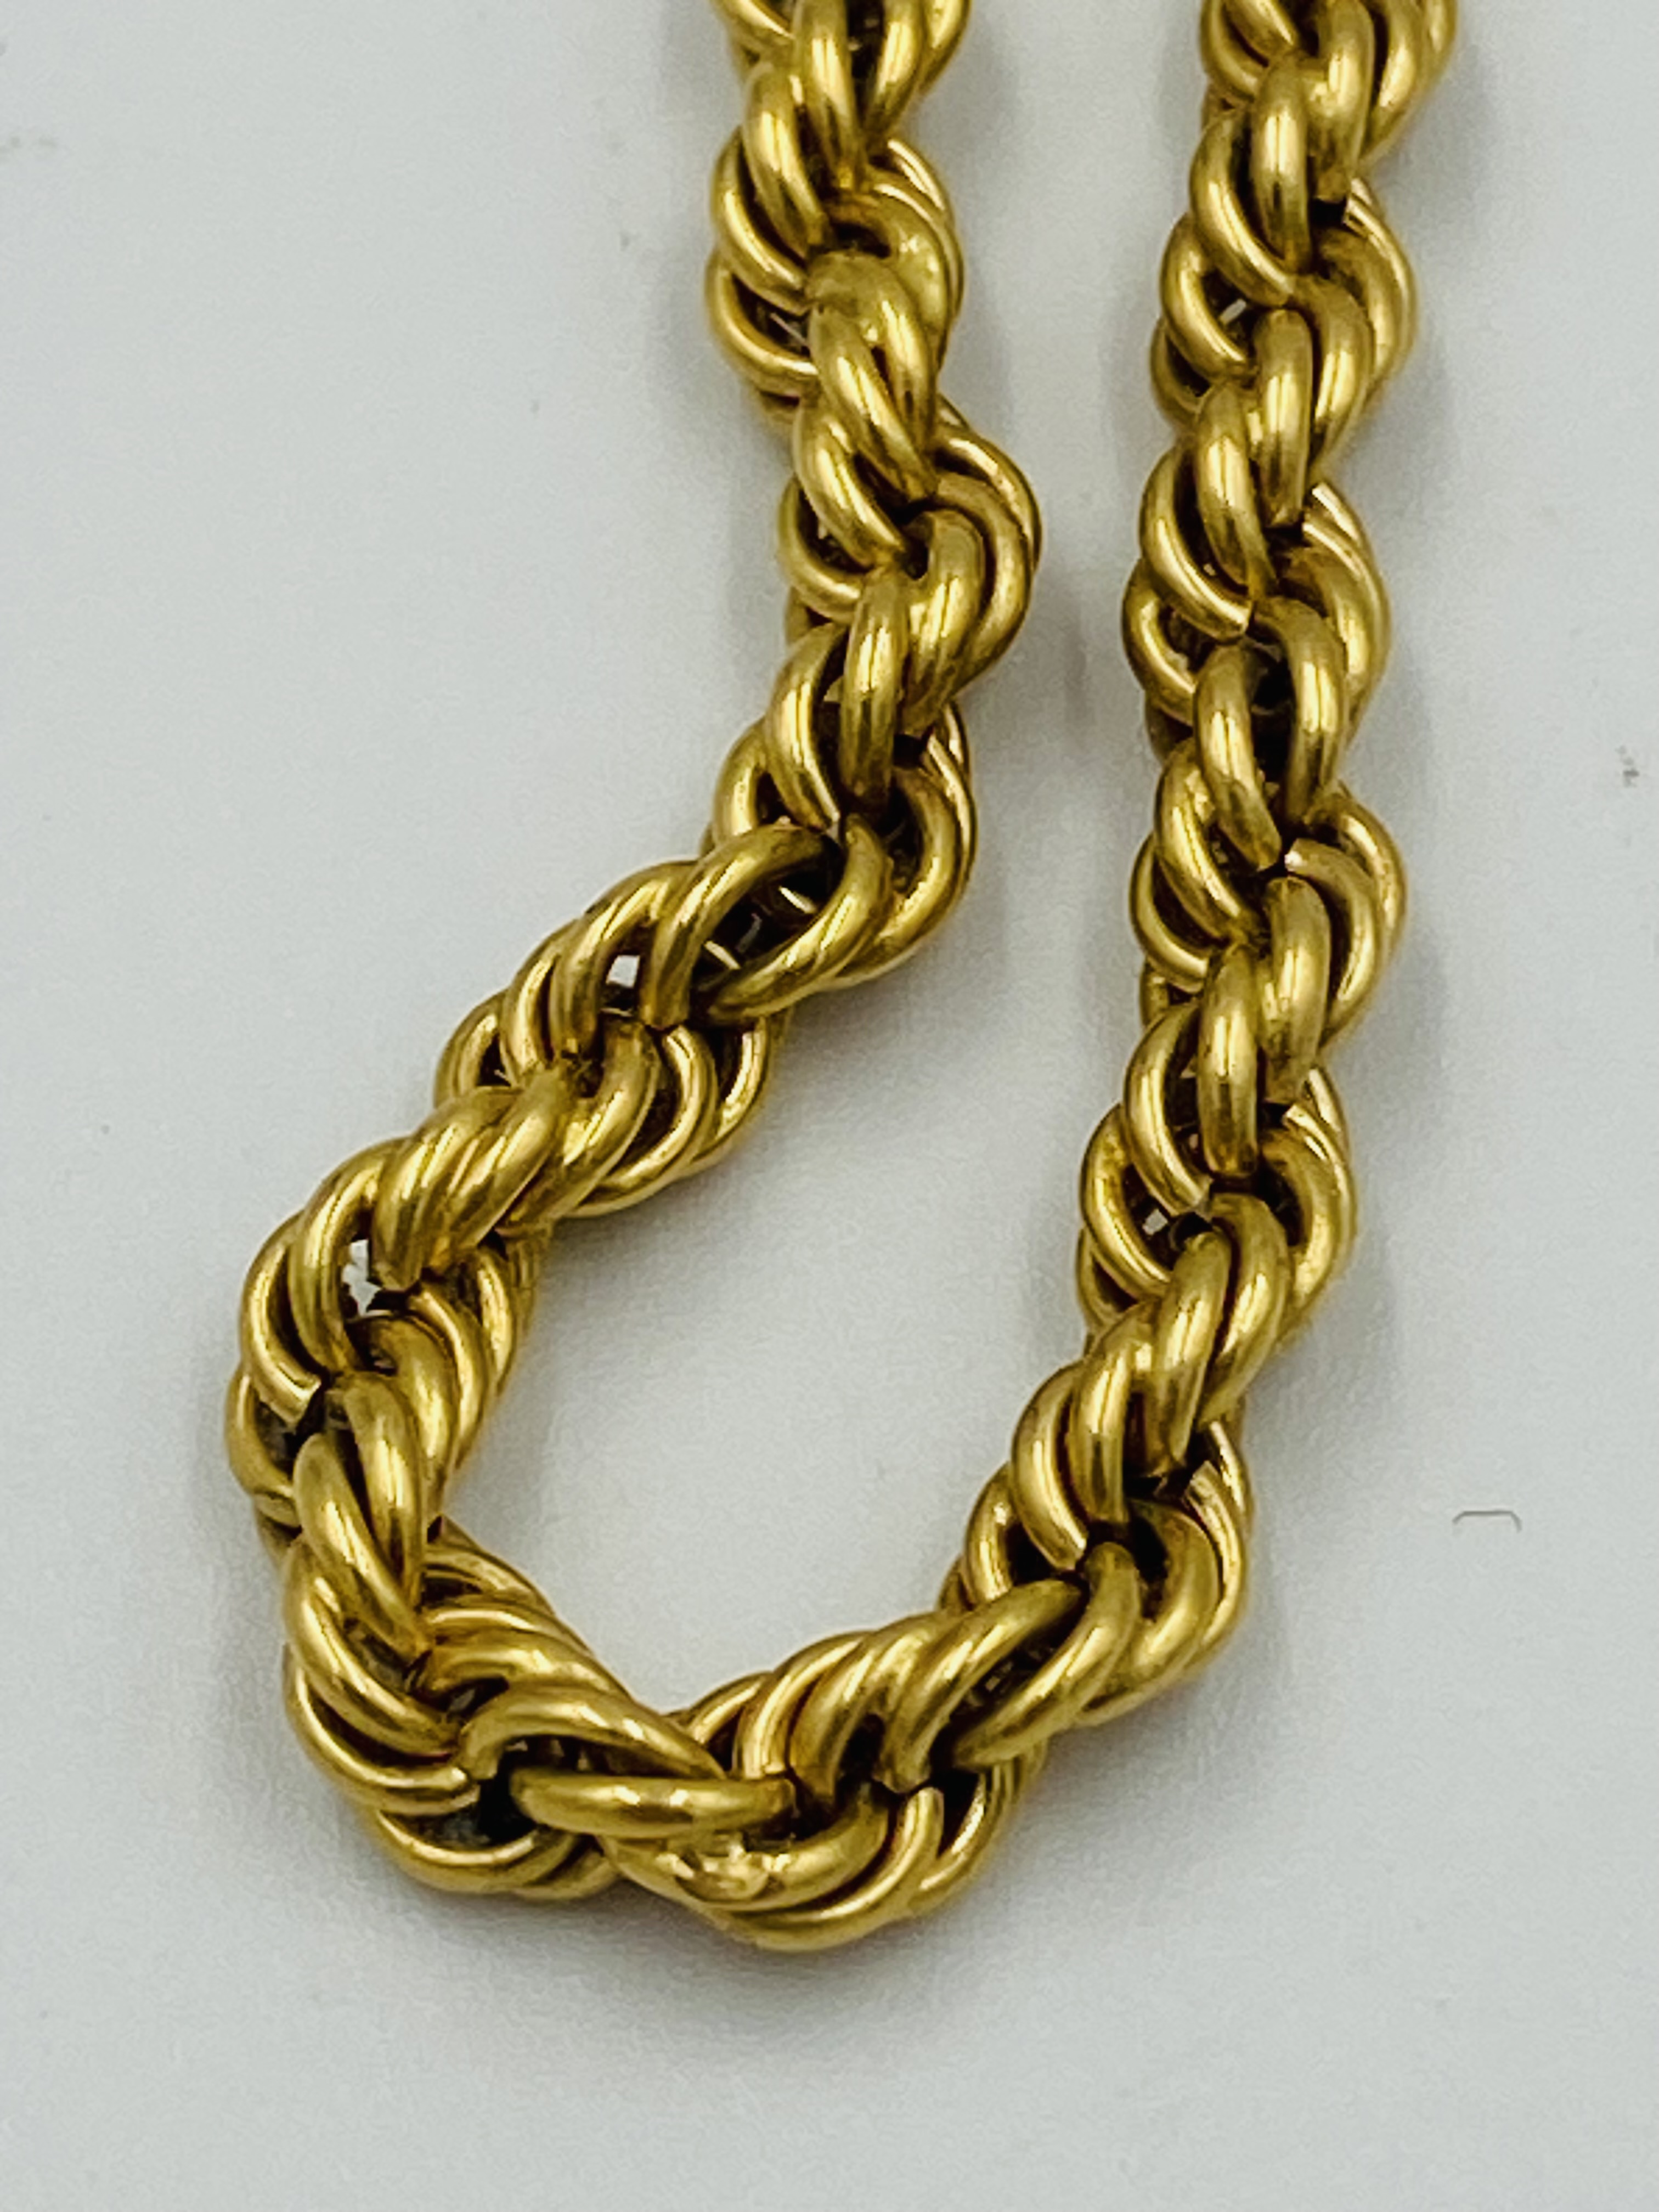 18ct gold rope twist chain - Image 3 of 4